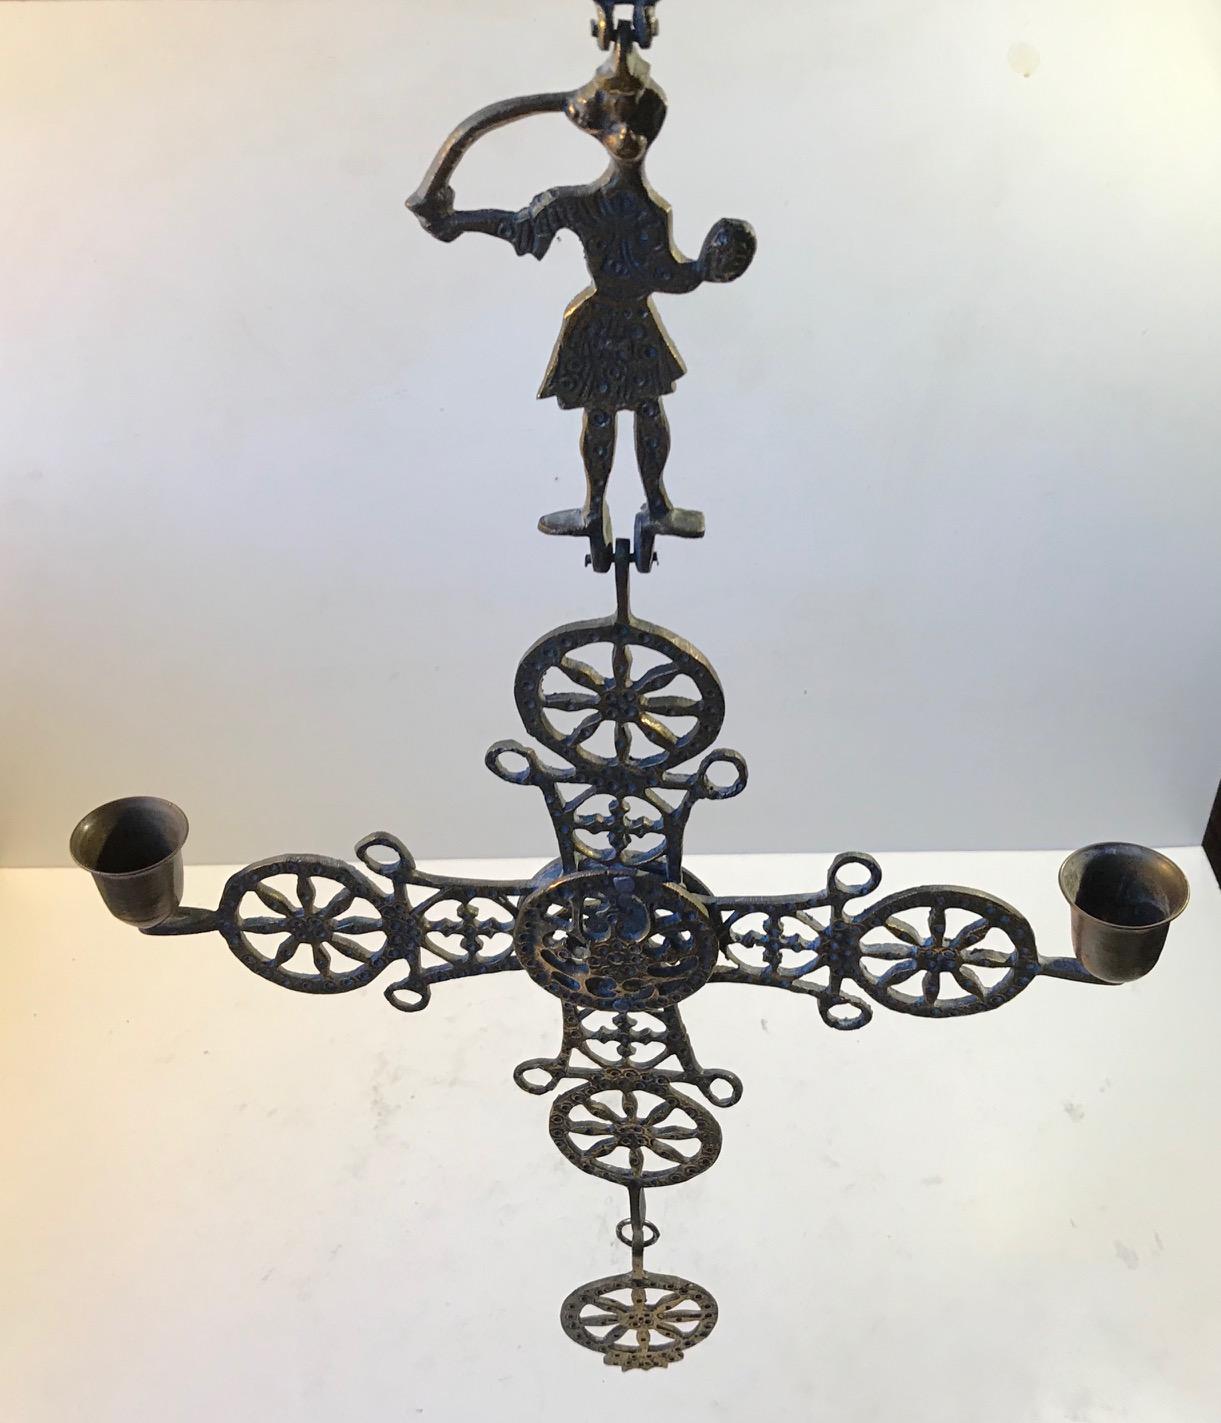 Byzantine inspired hanging pendant cross in ornate textured bronze. Greek Orthodox in style. Measuring 70 cm in length it can be hung from the ceiling or on the wall. It was made in Greece circa 1920 and probably by a metalshop called Smaltotex. It